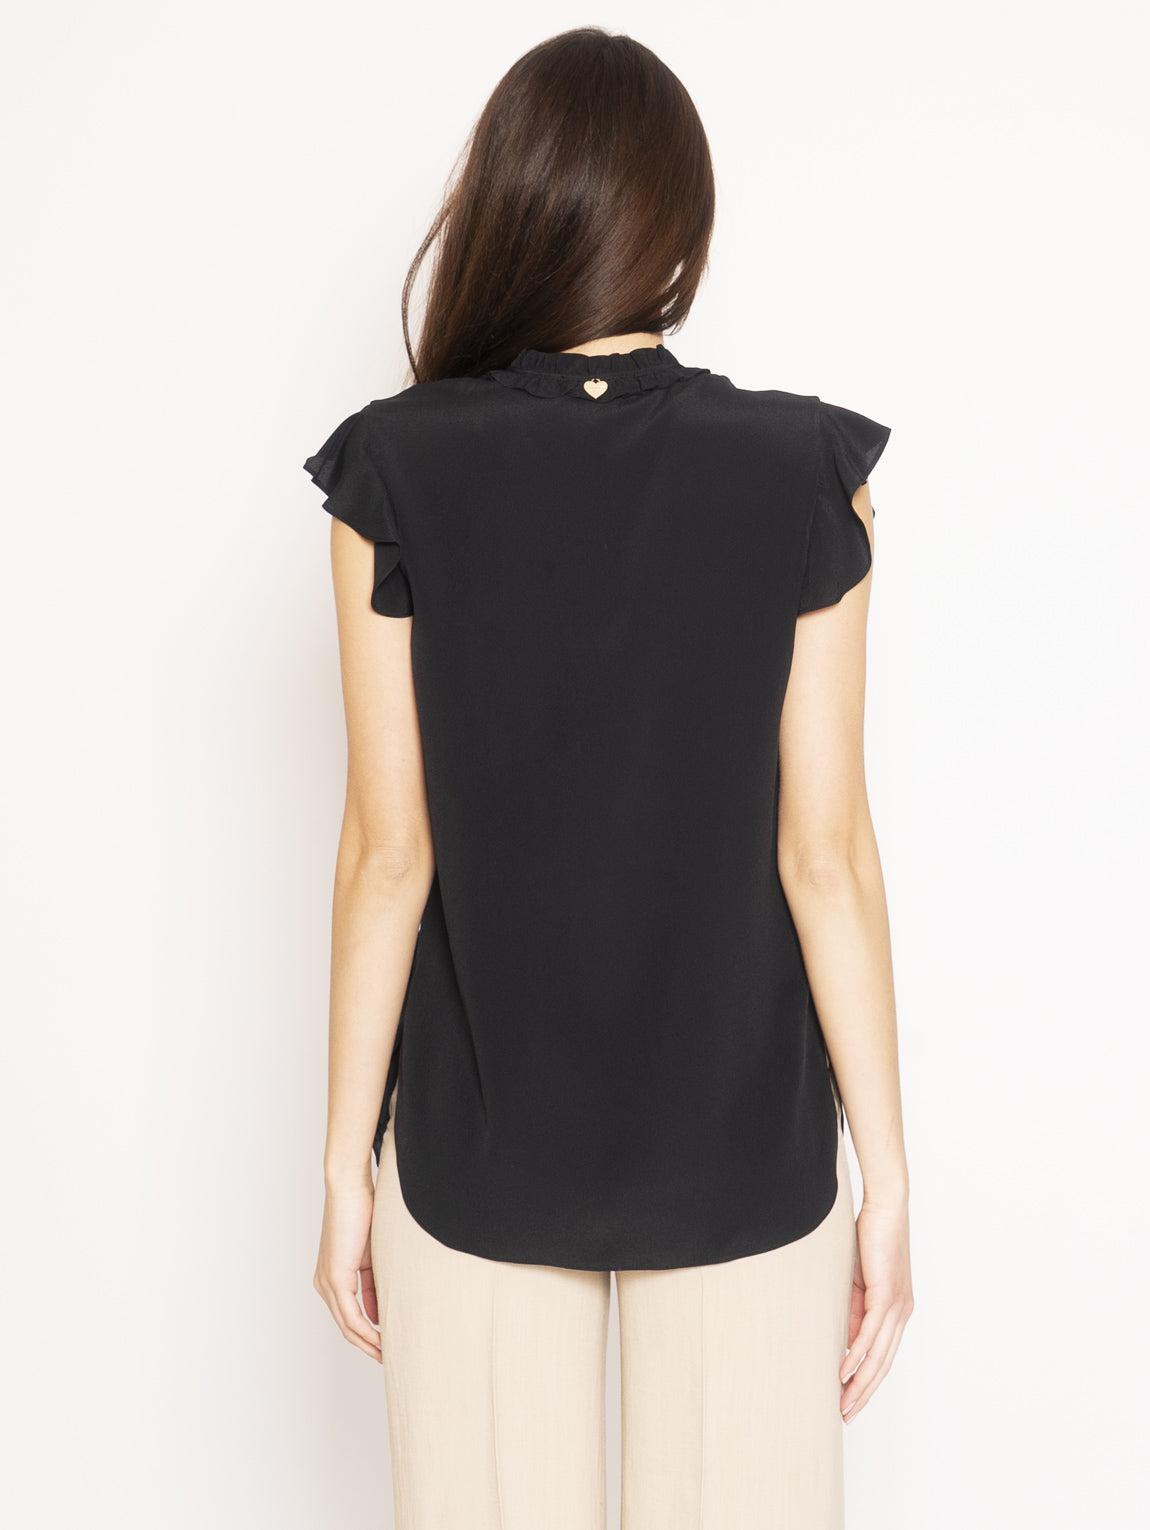 Blouse with Black Ruffle